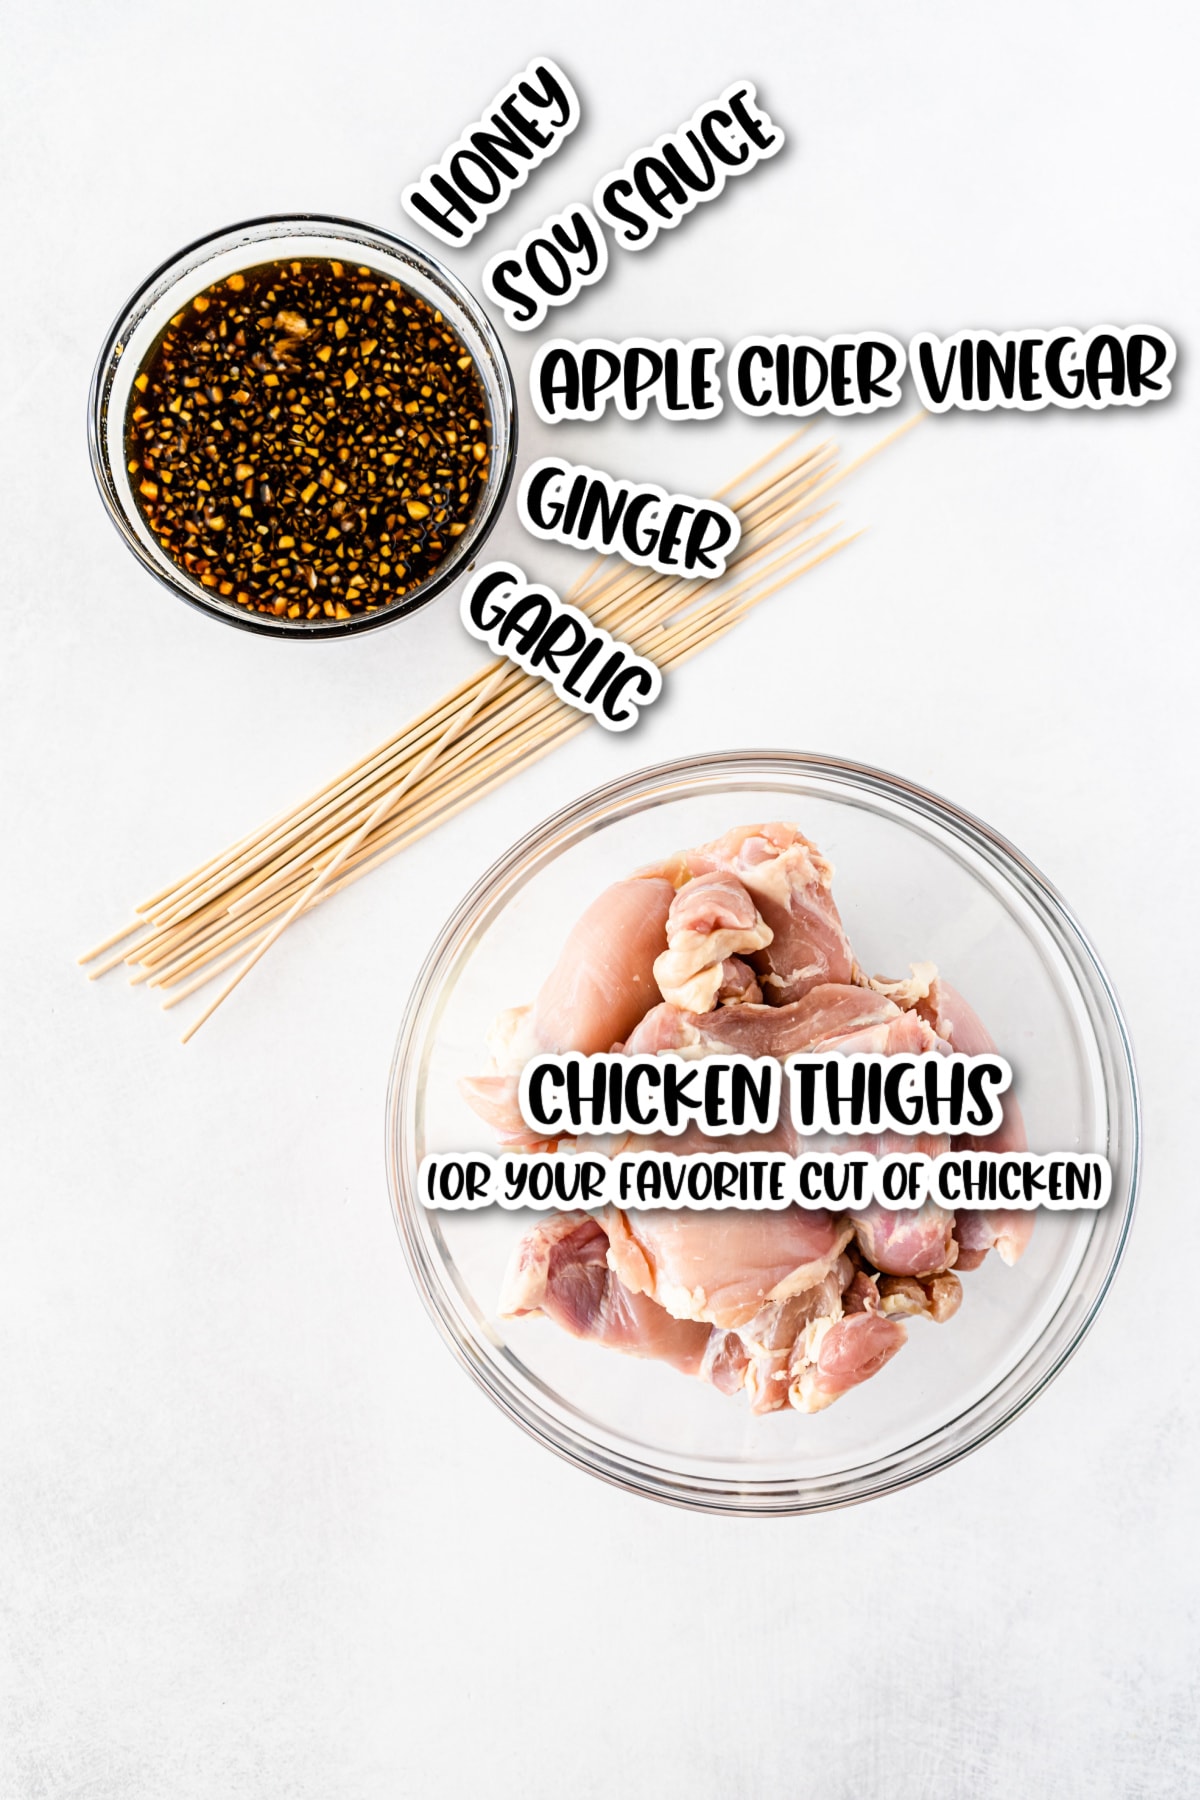 Chinese chicken on a stick Ingredients